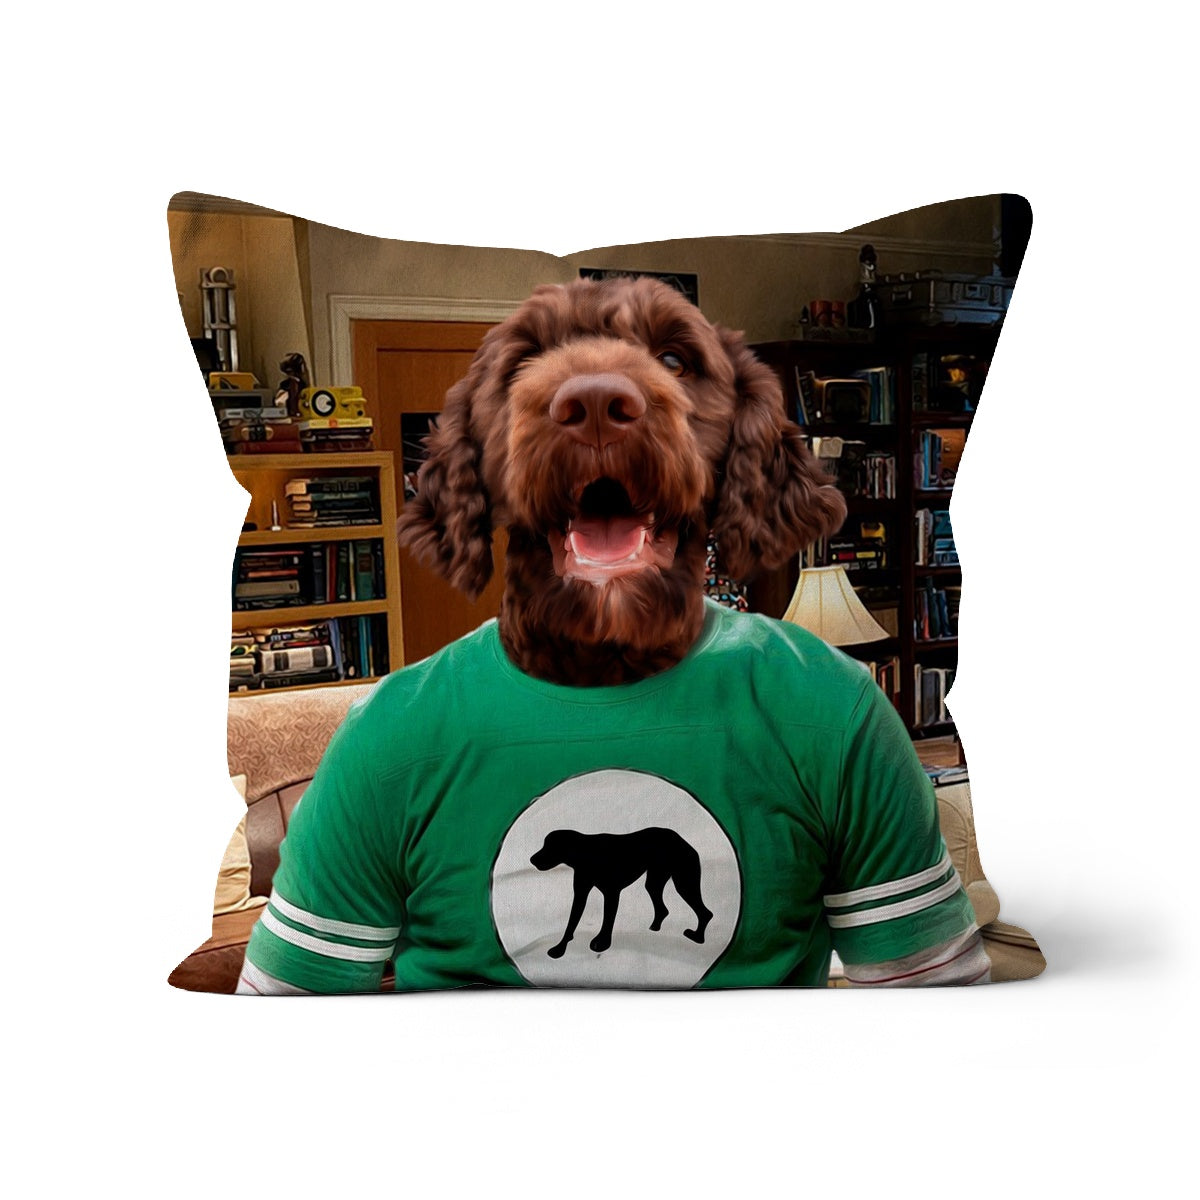 Paw & Glory, paw and glory, pillow personalized, pillow of your dog, custom pillow design, dog print pillow, pet pillow photo, pillow custom, Pet Portraits cushion,